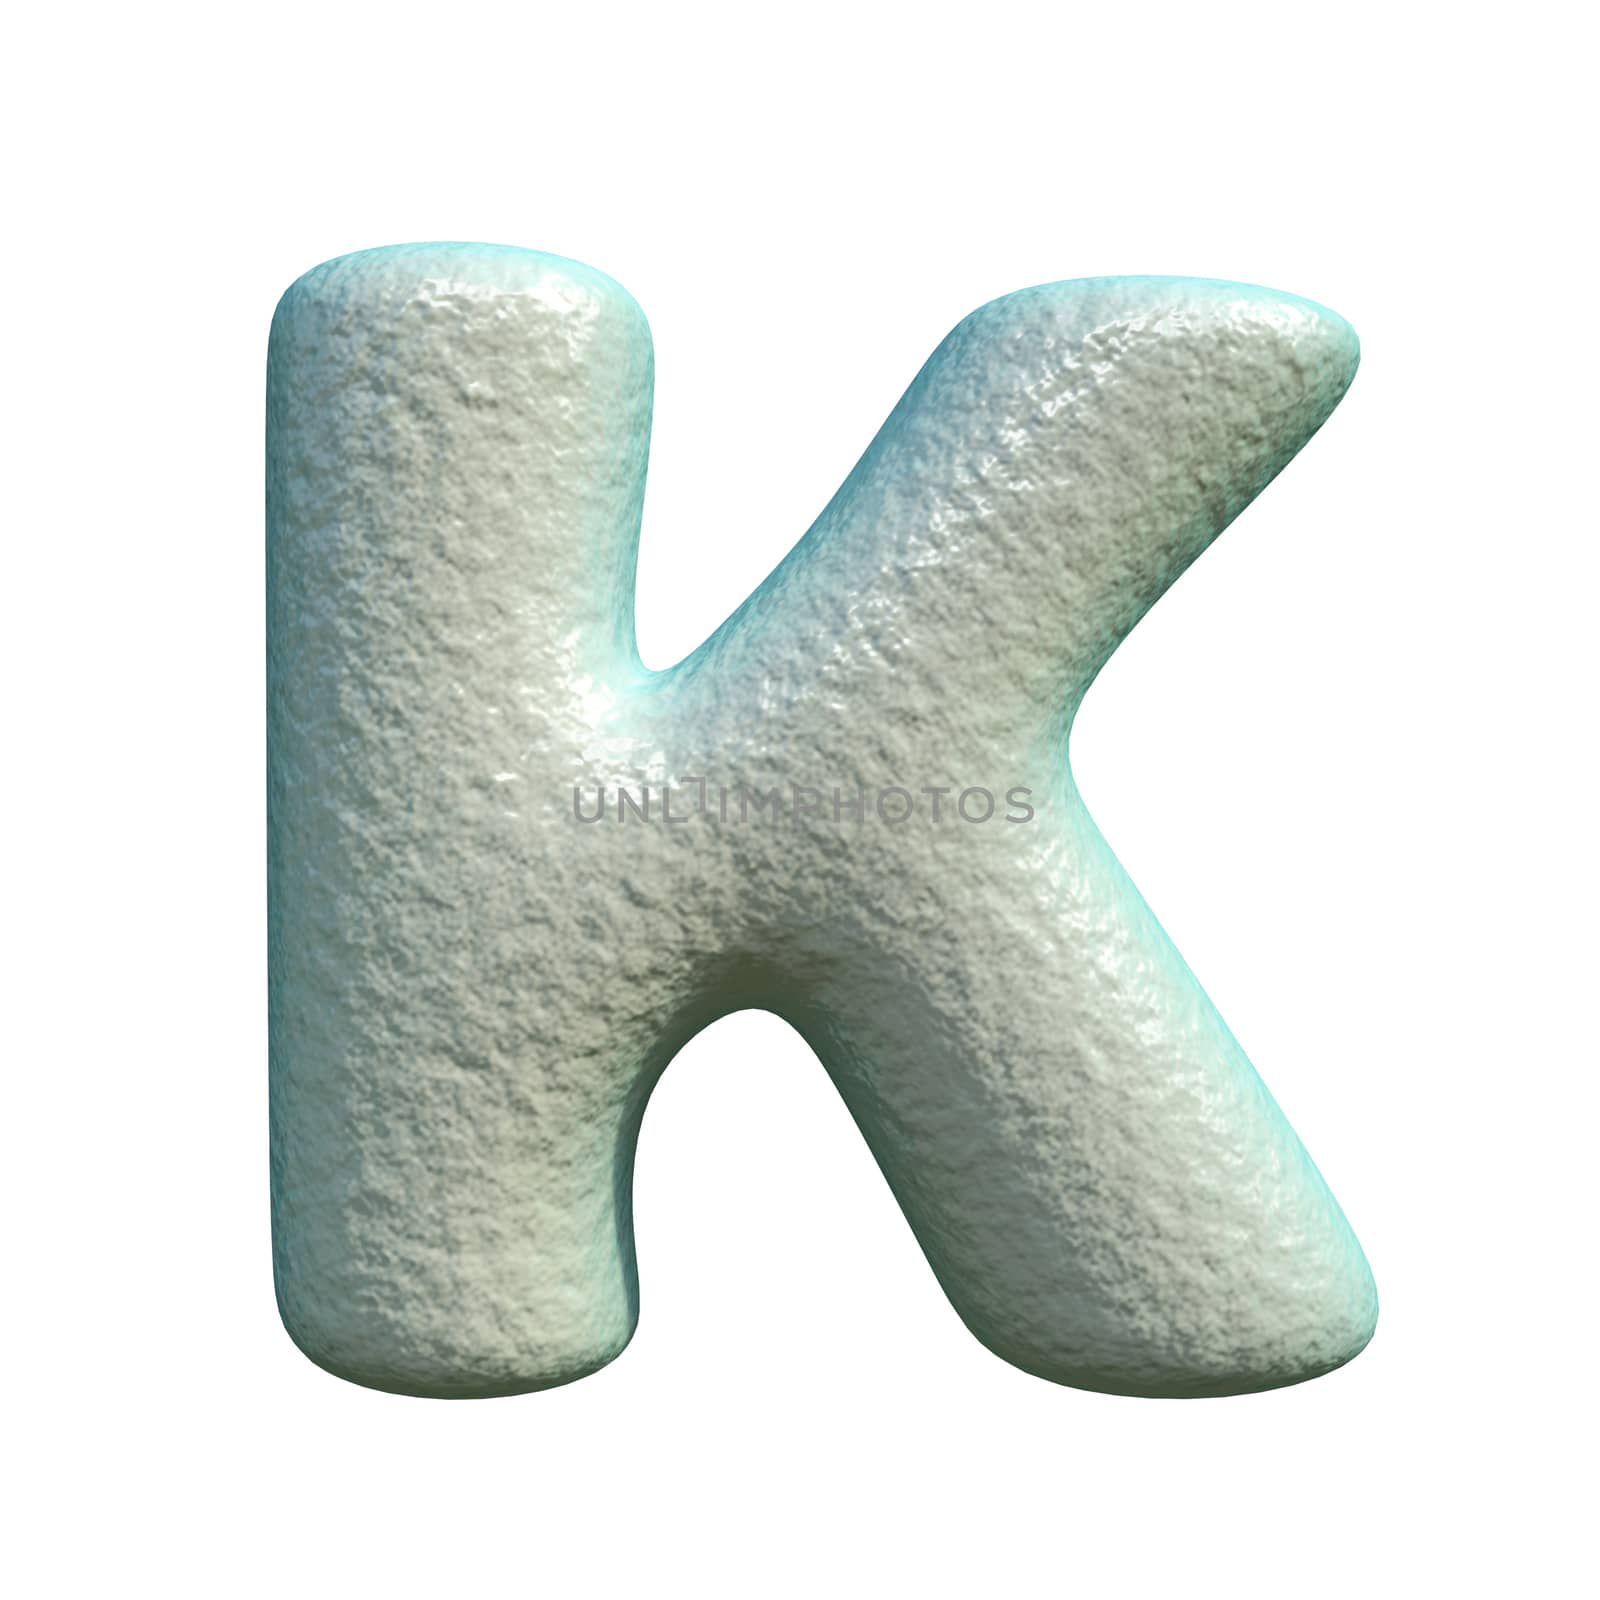 Grey blue clay font Letter K 3D rendering illustration isolated on white background